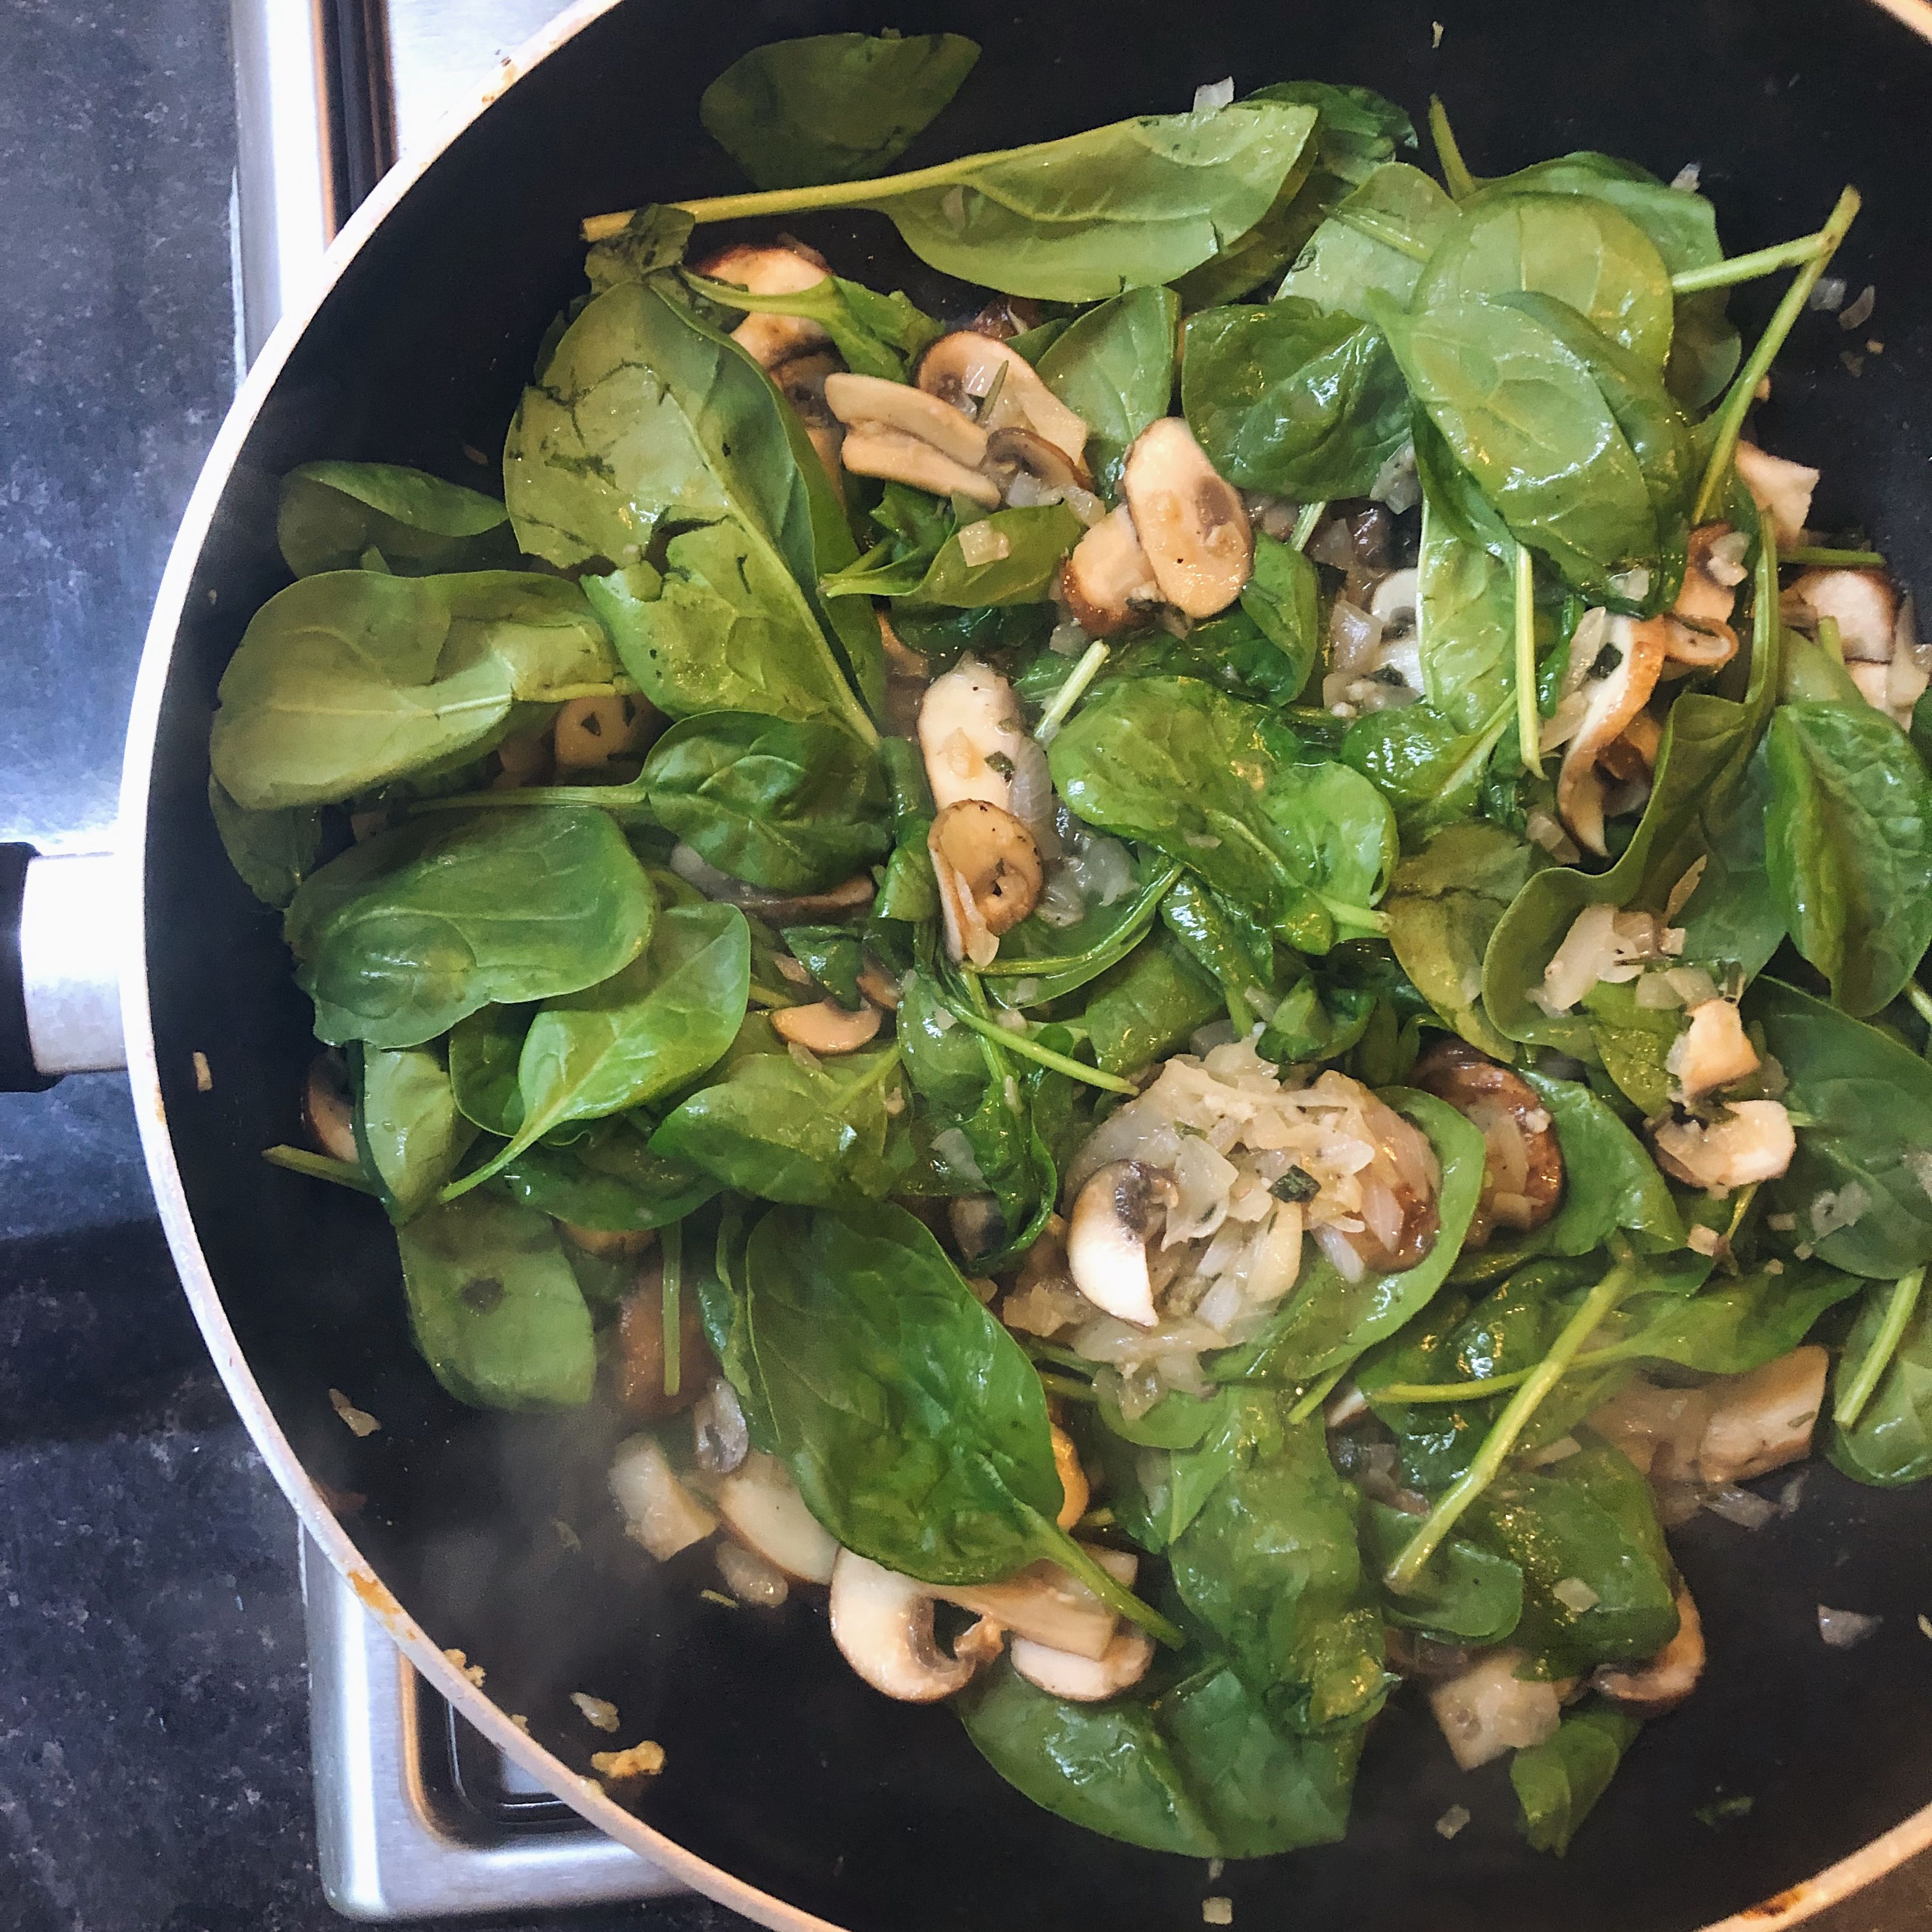 While onions are sweating, slice mushrooms. Then add mushrooms and spinach to the pan and cook for 10 minutes.